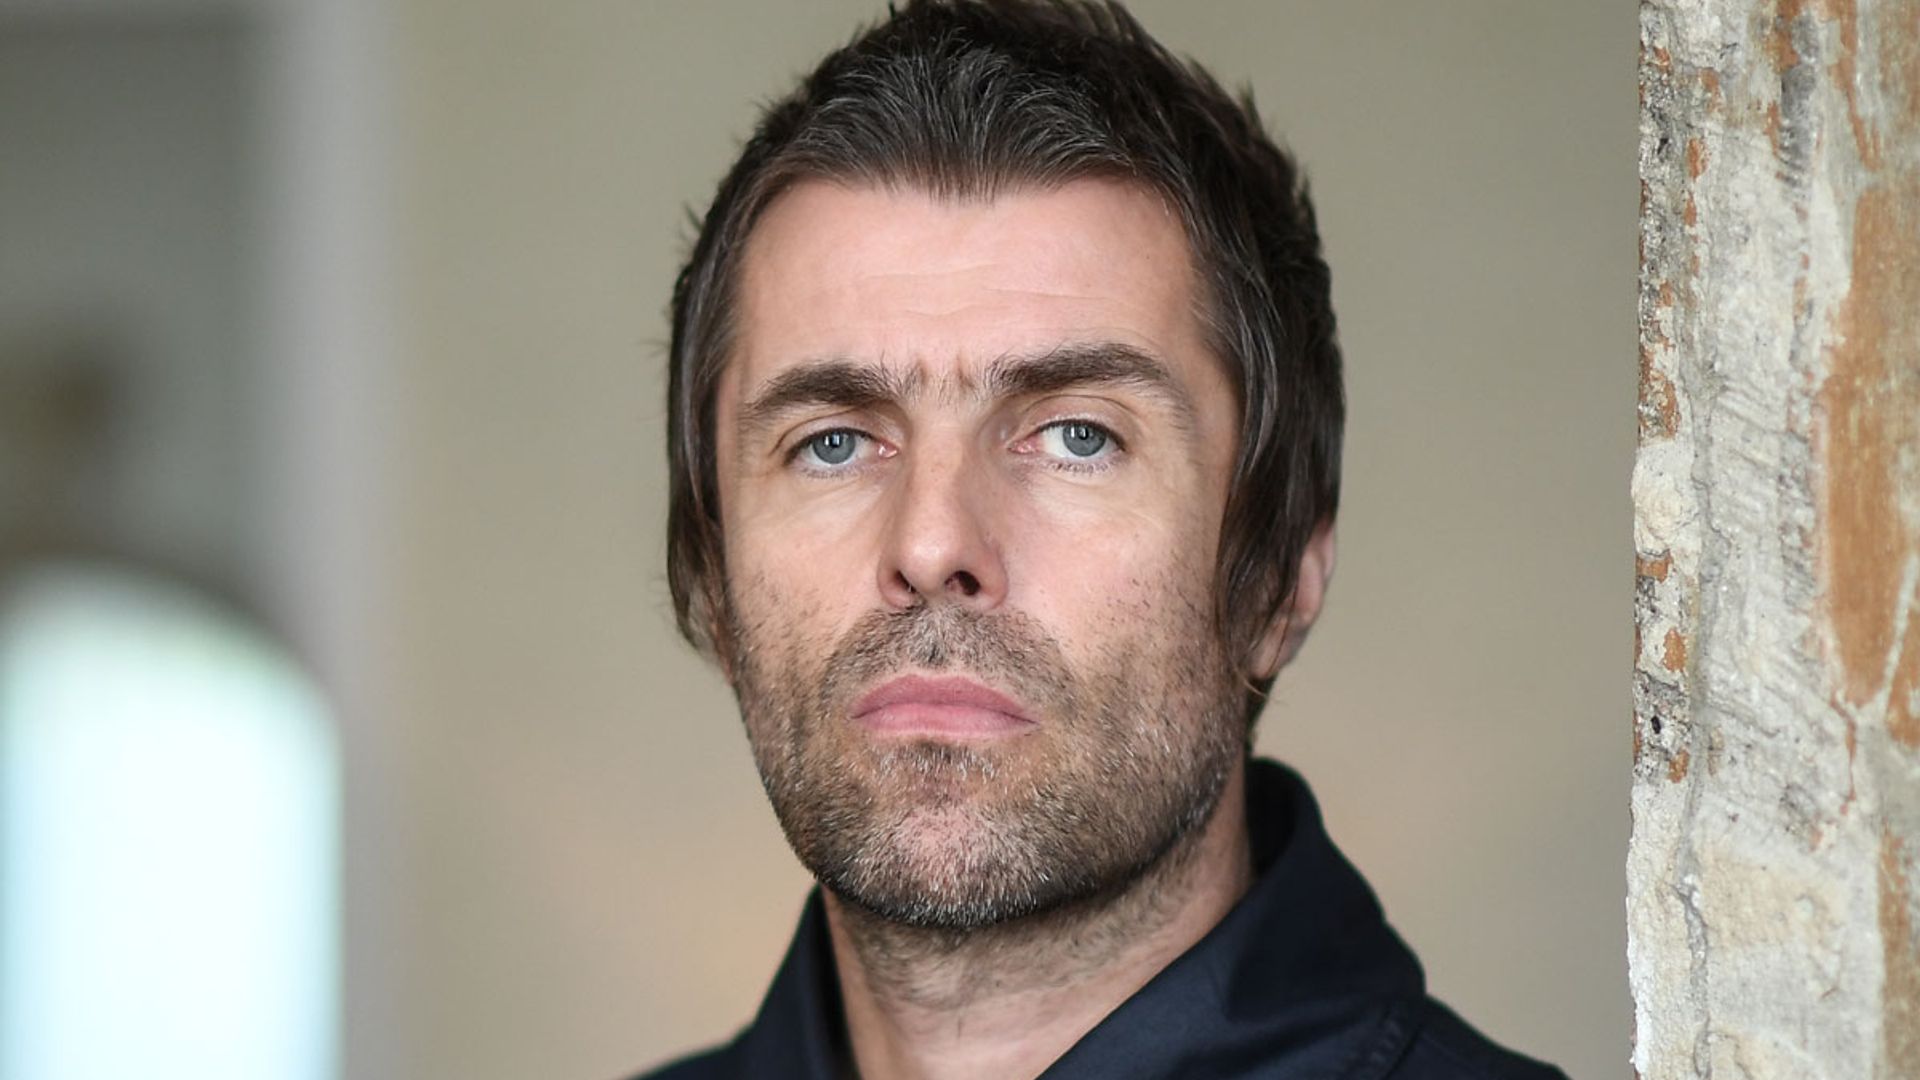 Liam Gallagher arthritis struggle: everything the musician has said about 'agony' he's in